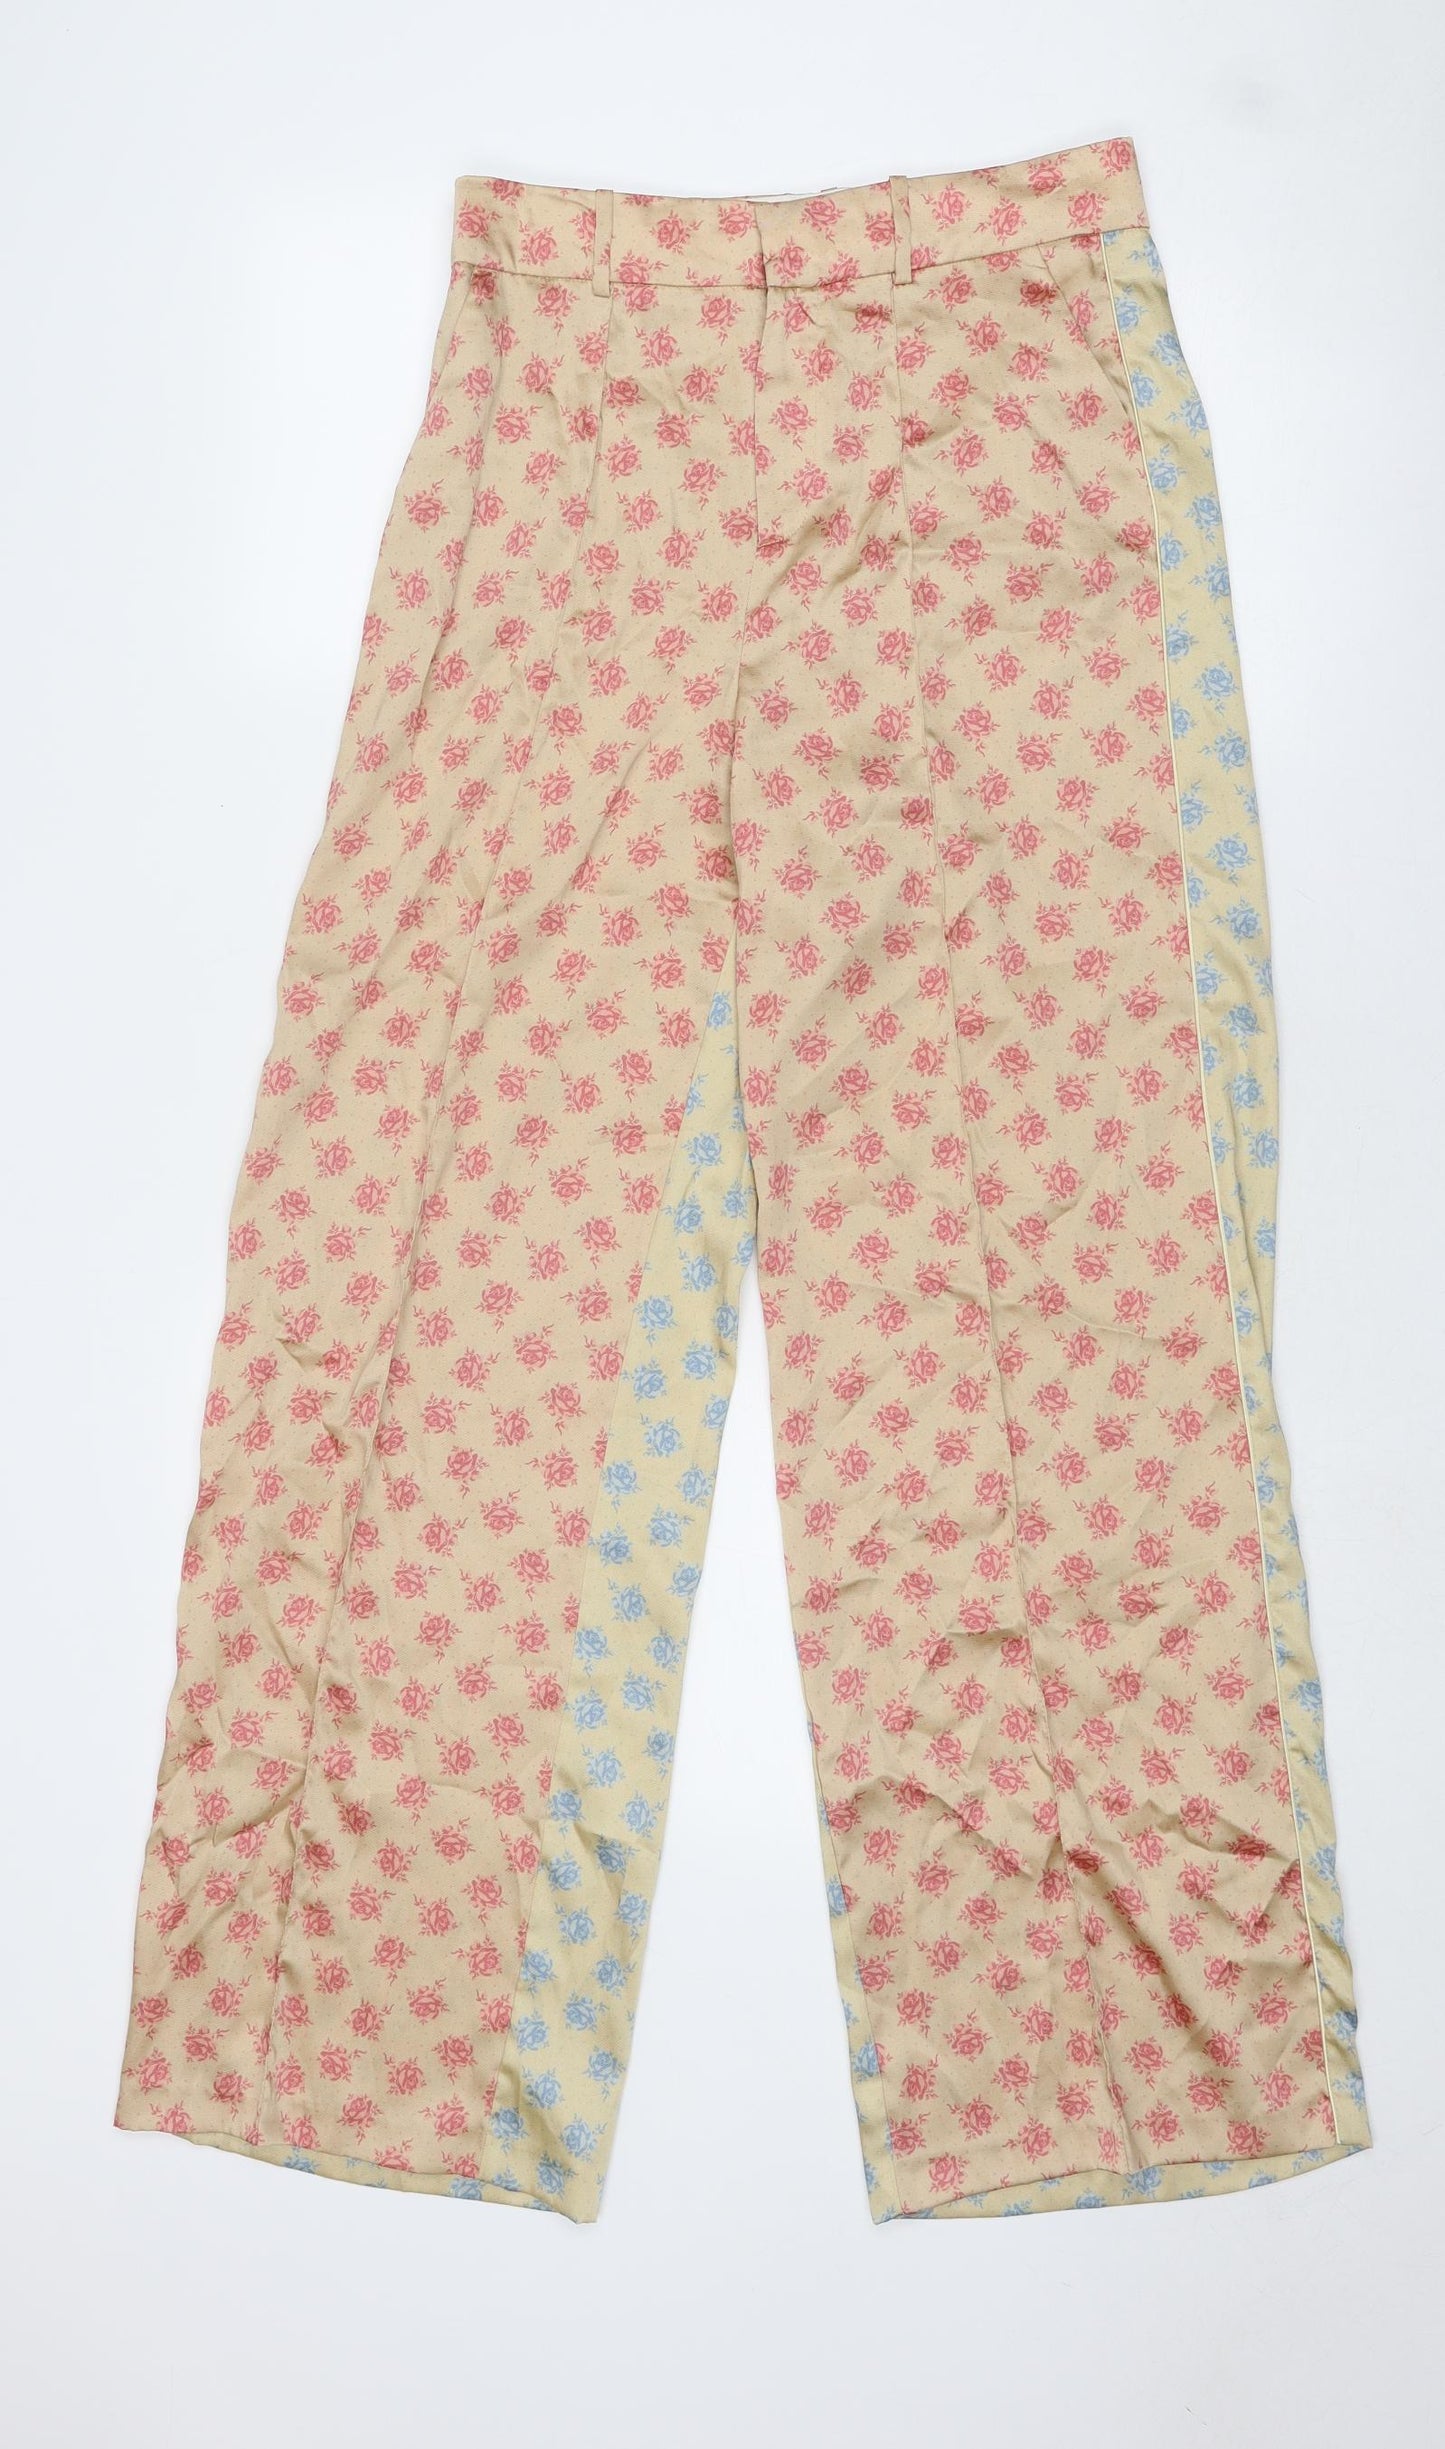 Zara Womens Multicoloured Floral Polyester Trousers Size S Regular Zip